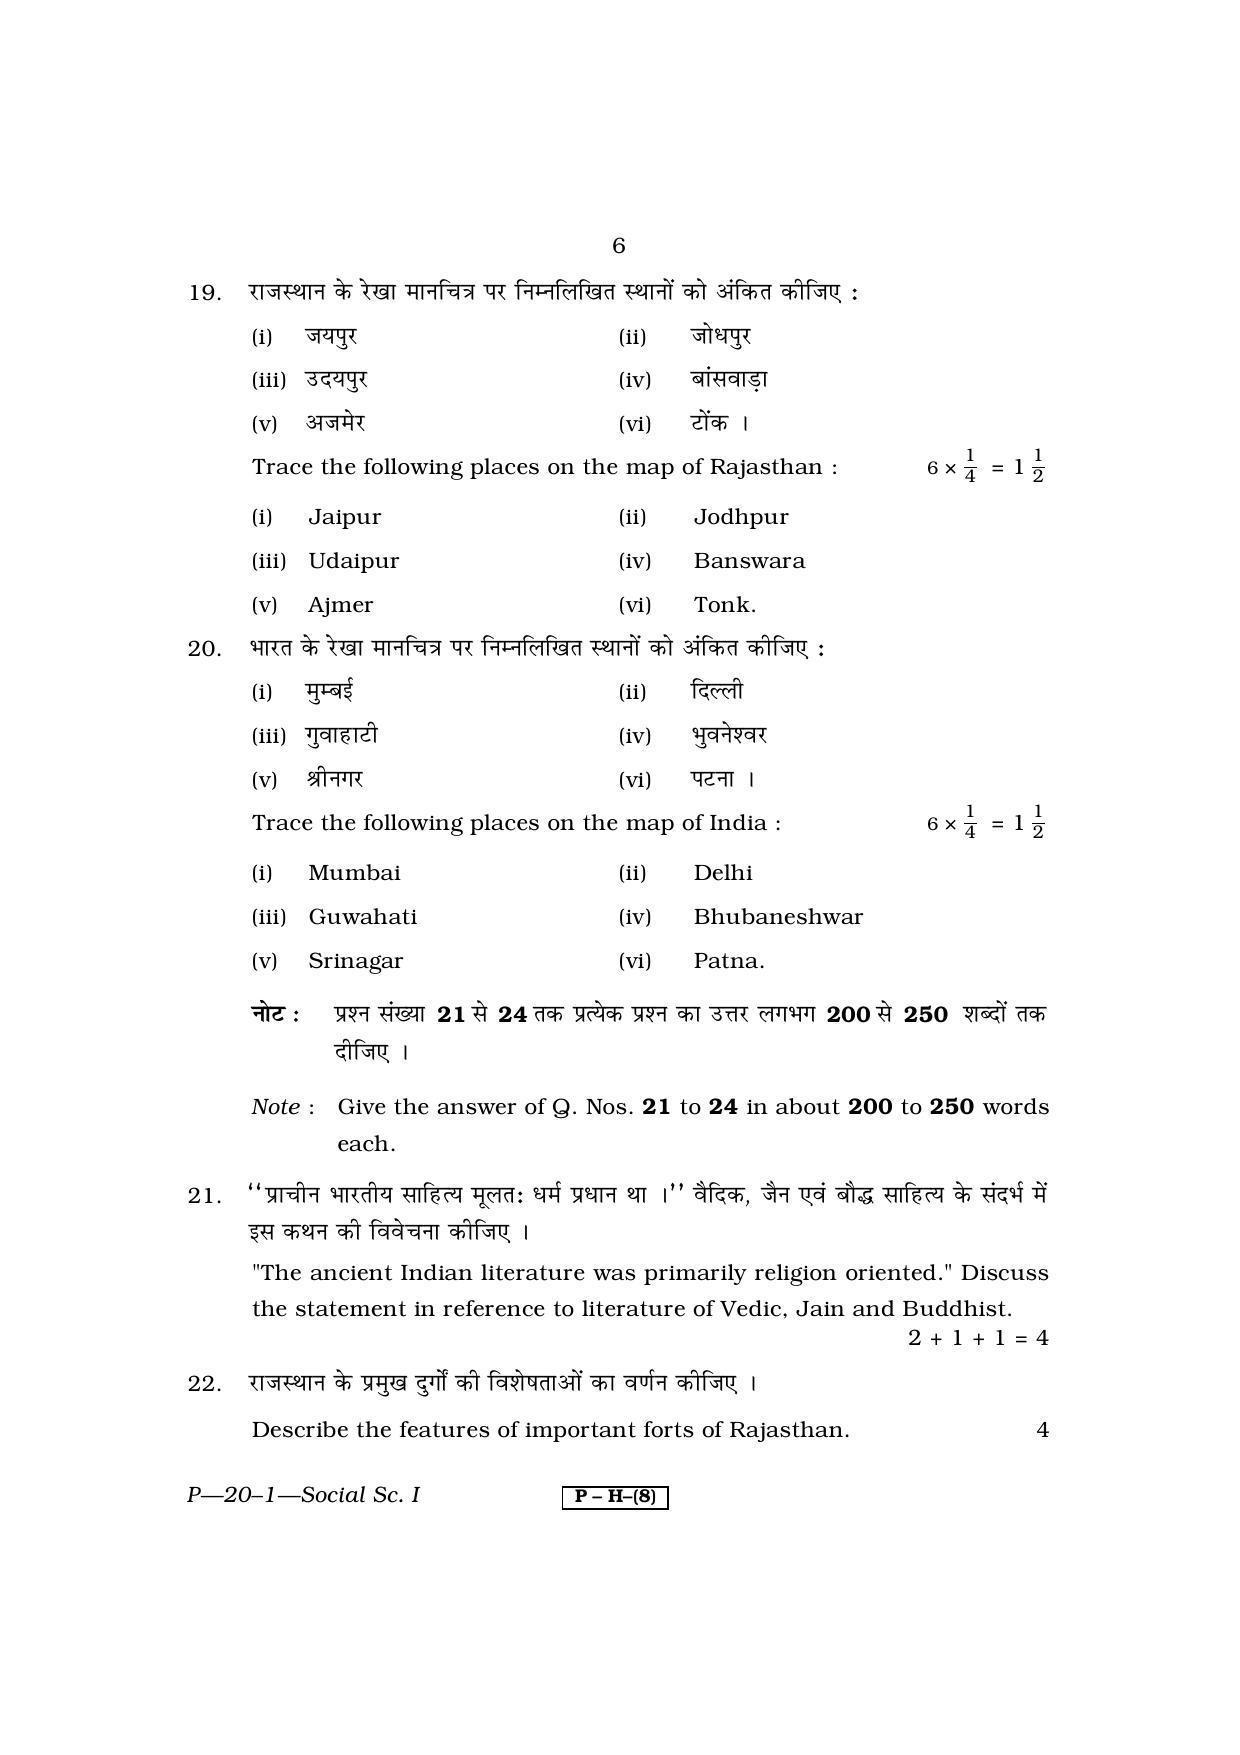 RBSE 2011 Social Science I Praveshika Question Paper - Page 6